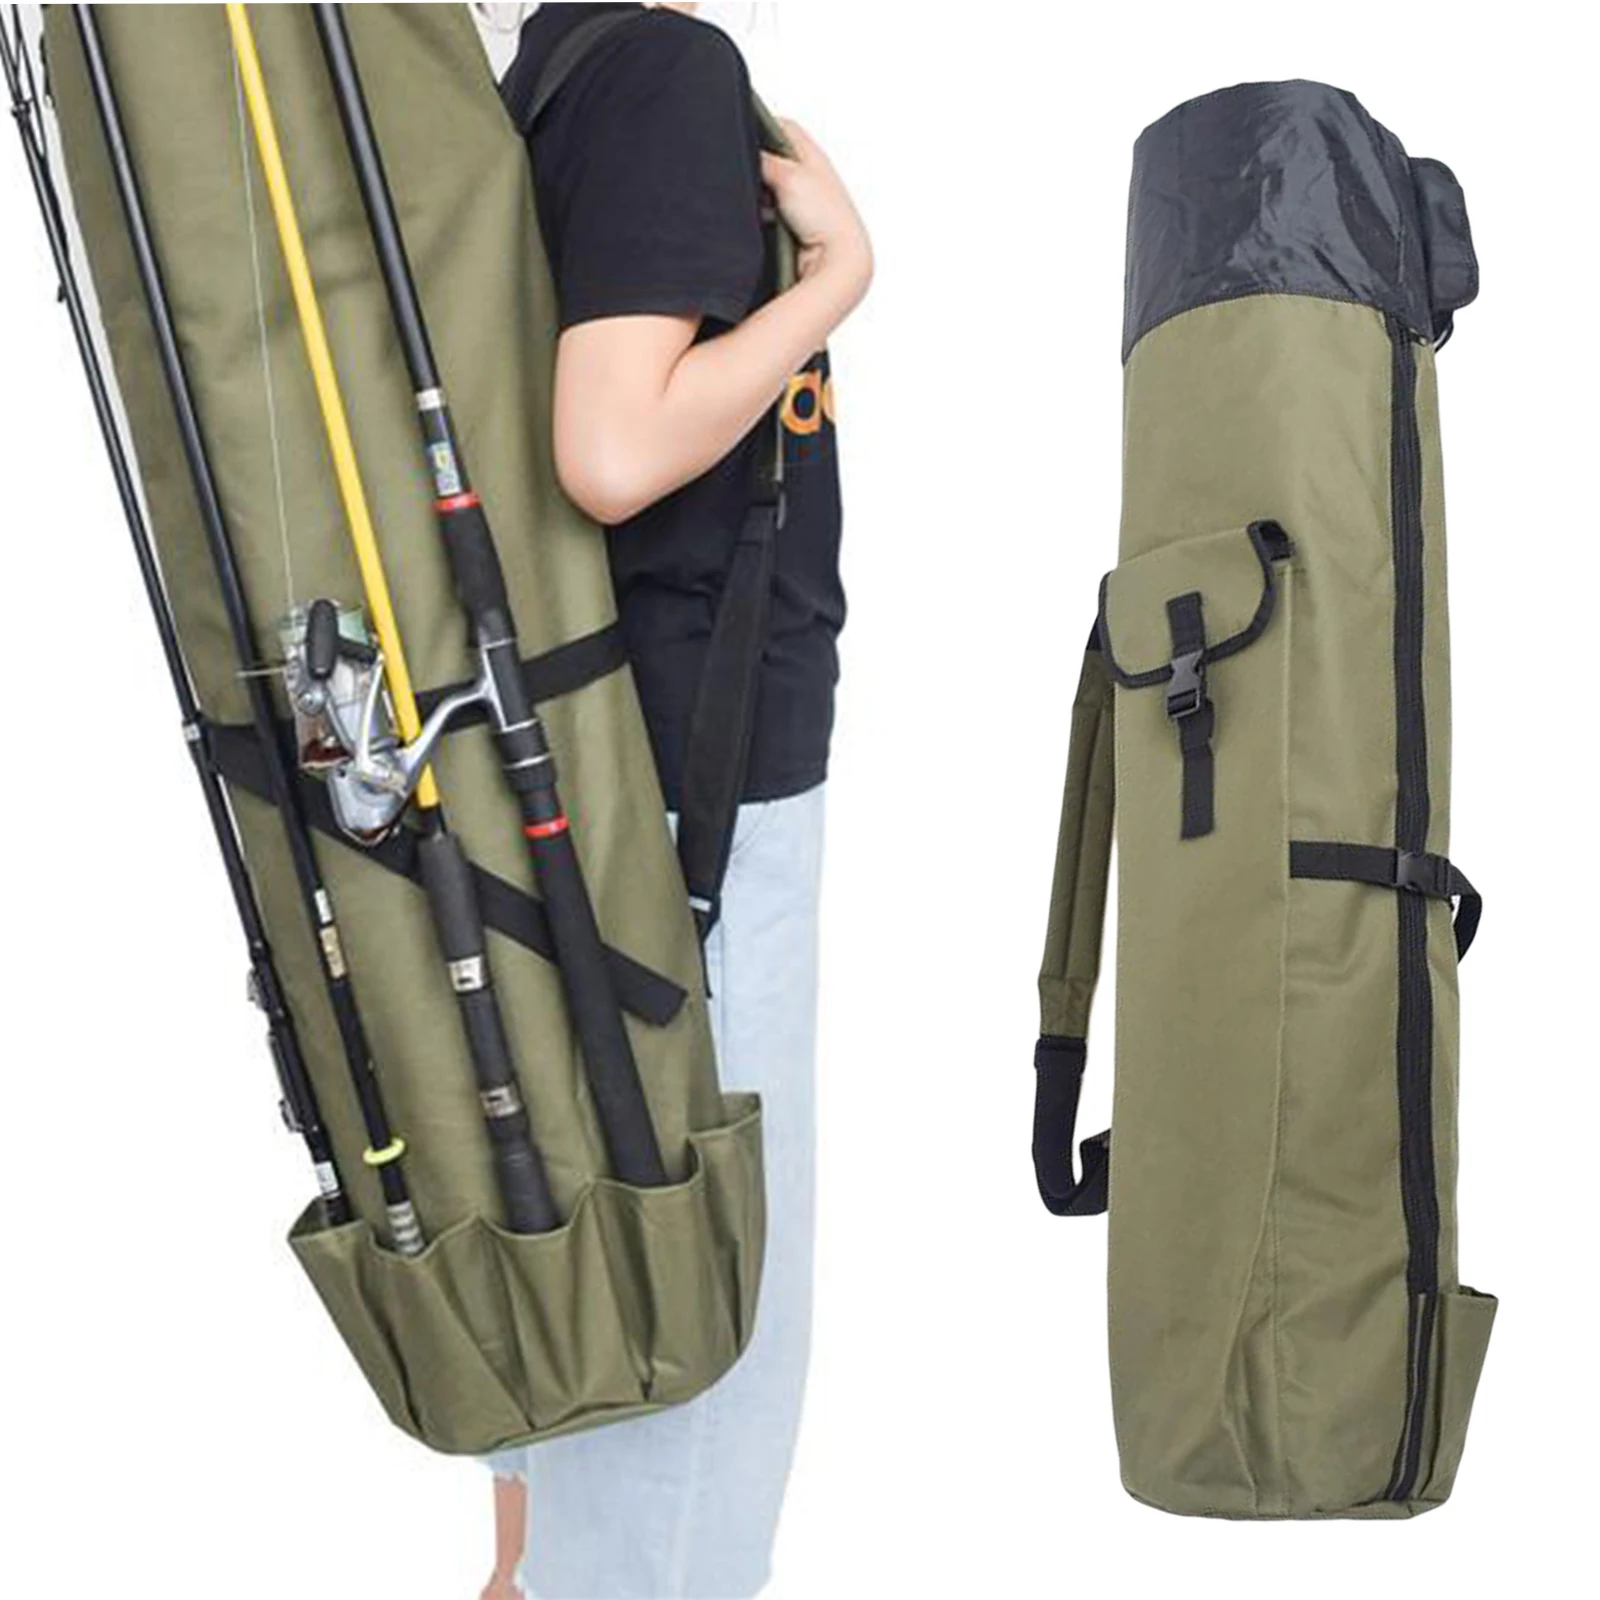 

Waterproof Fishing Tackle Bag Fishing Rods Holder Travel Reel Carry Case Pole Tools Storage Bags Holds 5 Poles